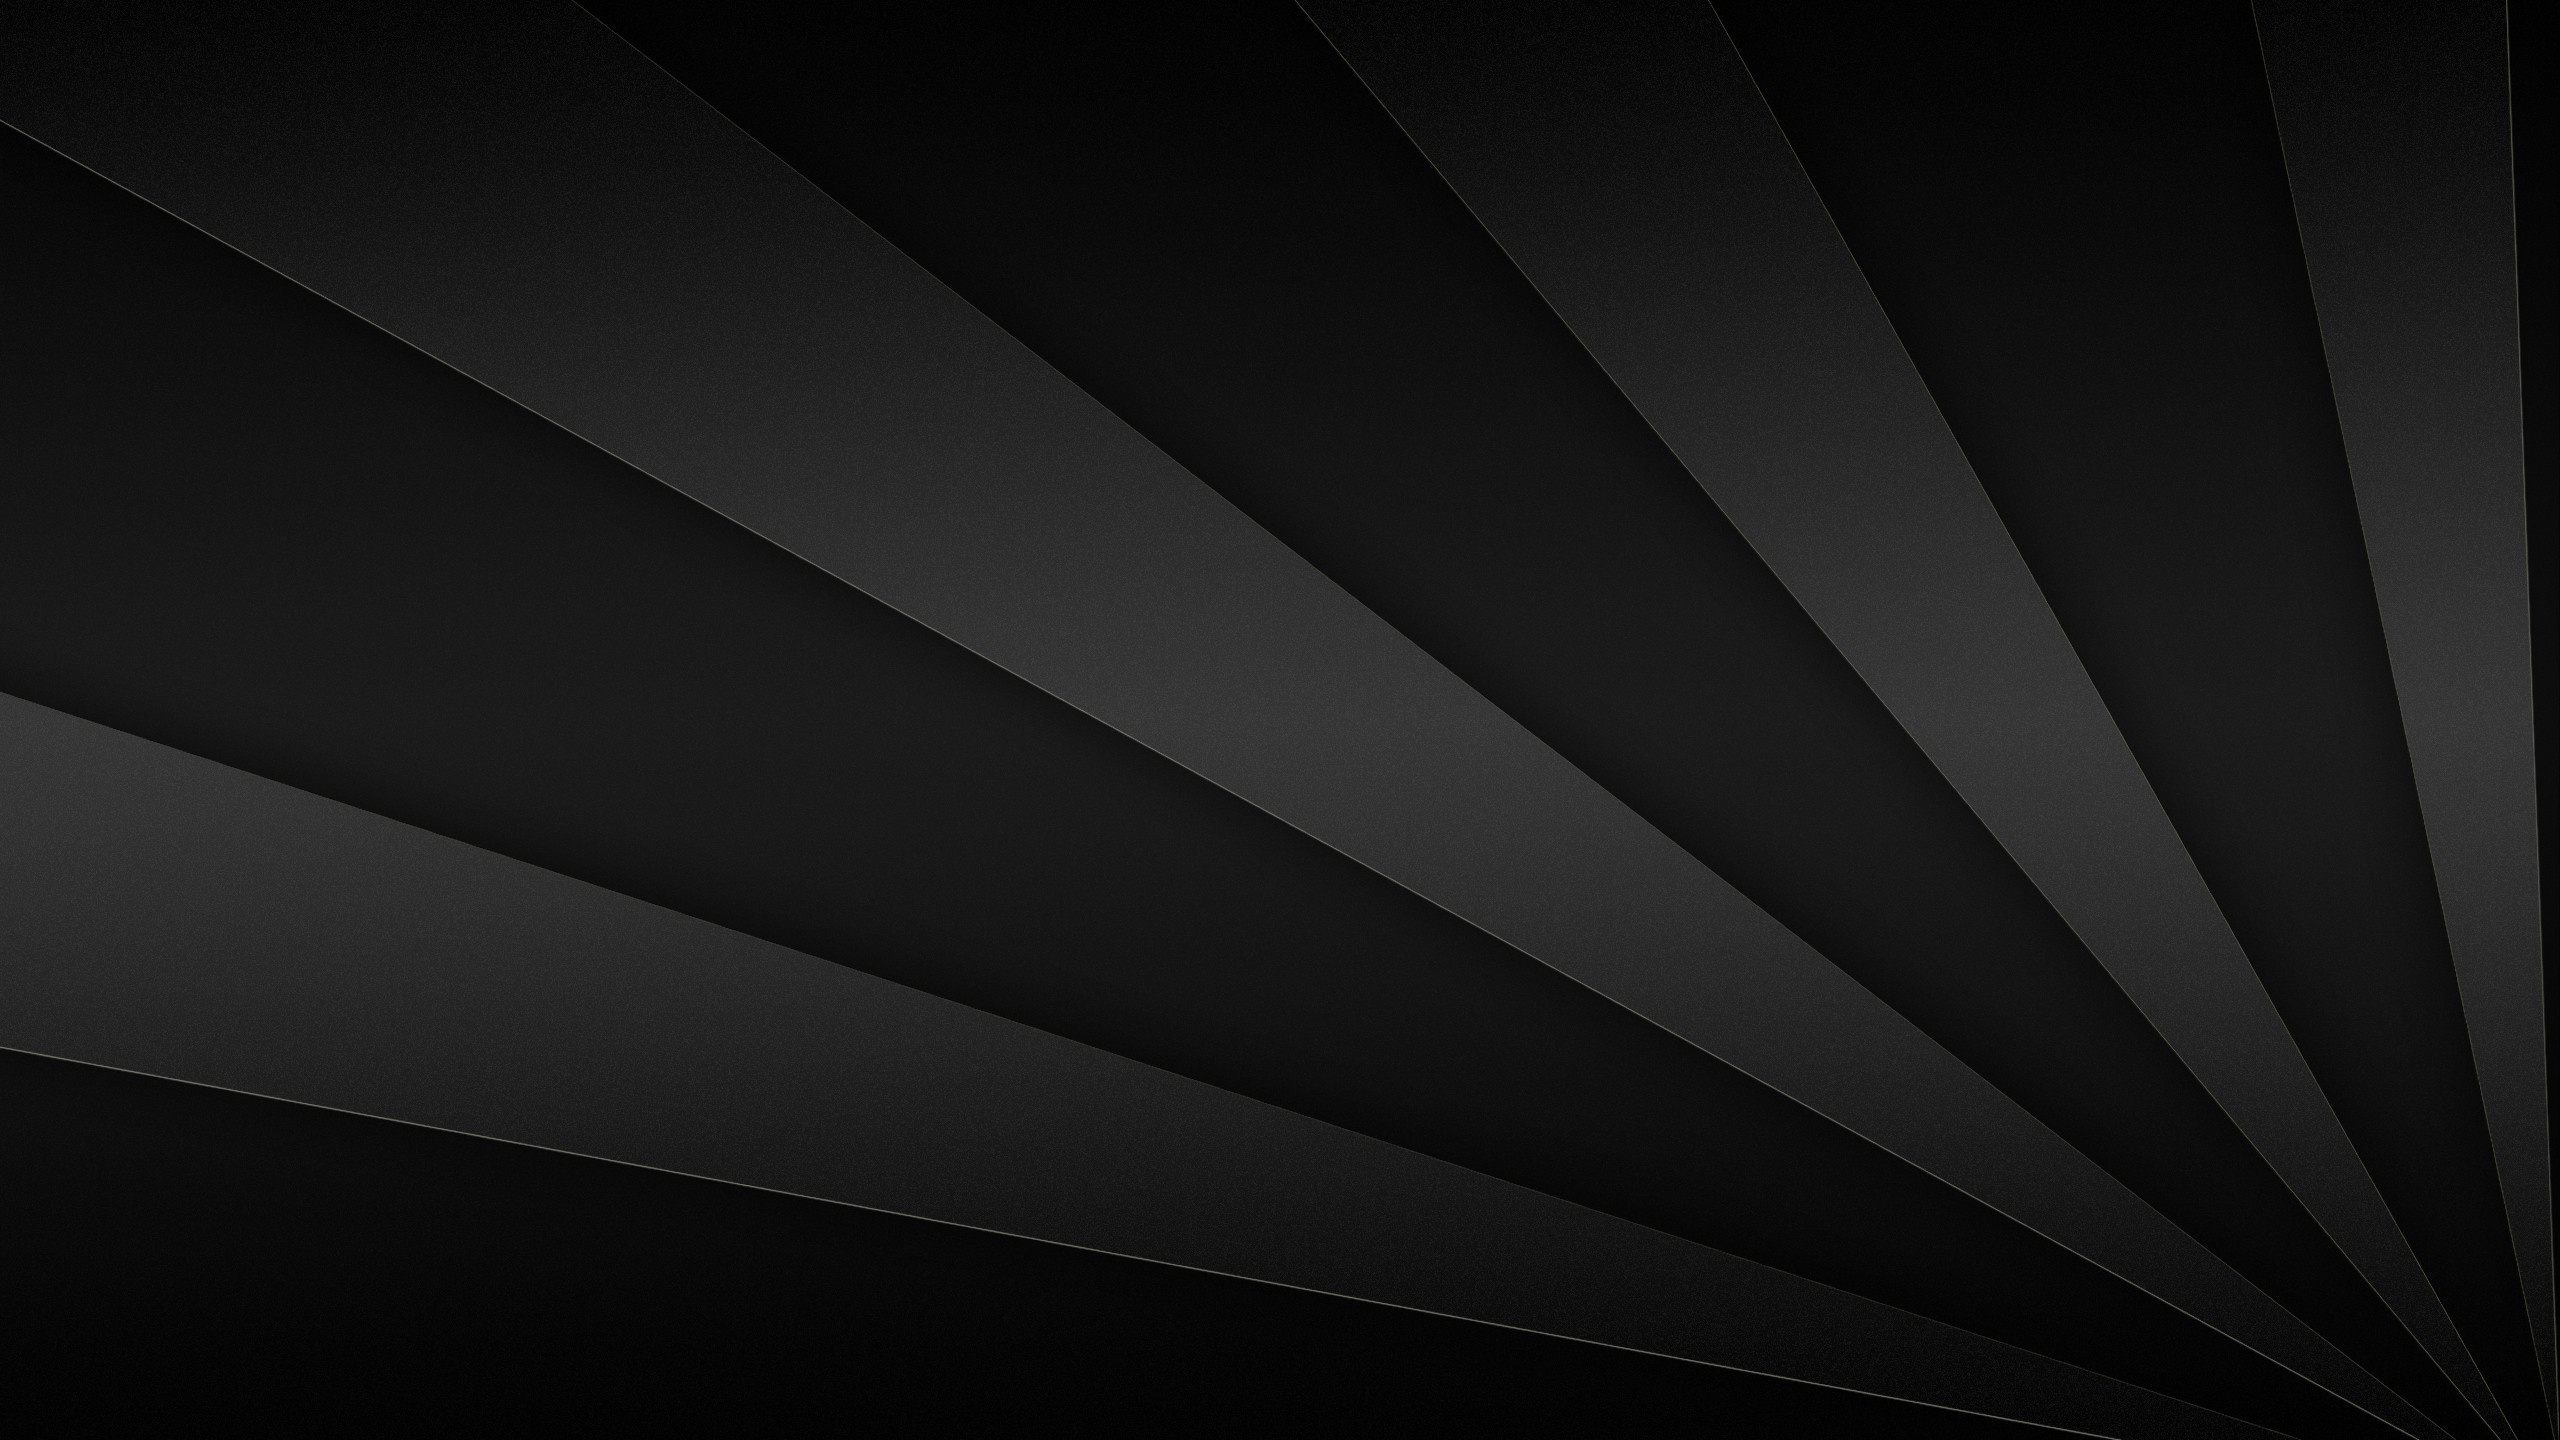 Black and White Line Illustration. Wallpaper in 2560x1440 Resolution